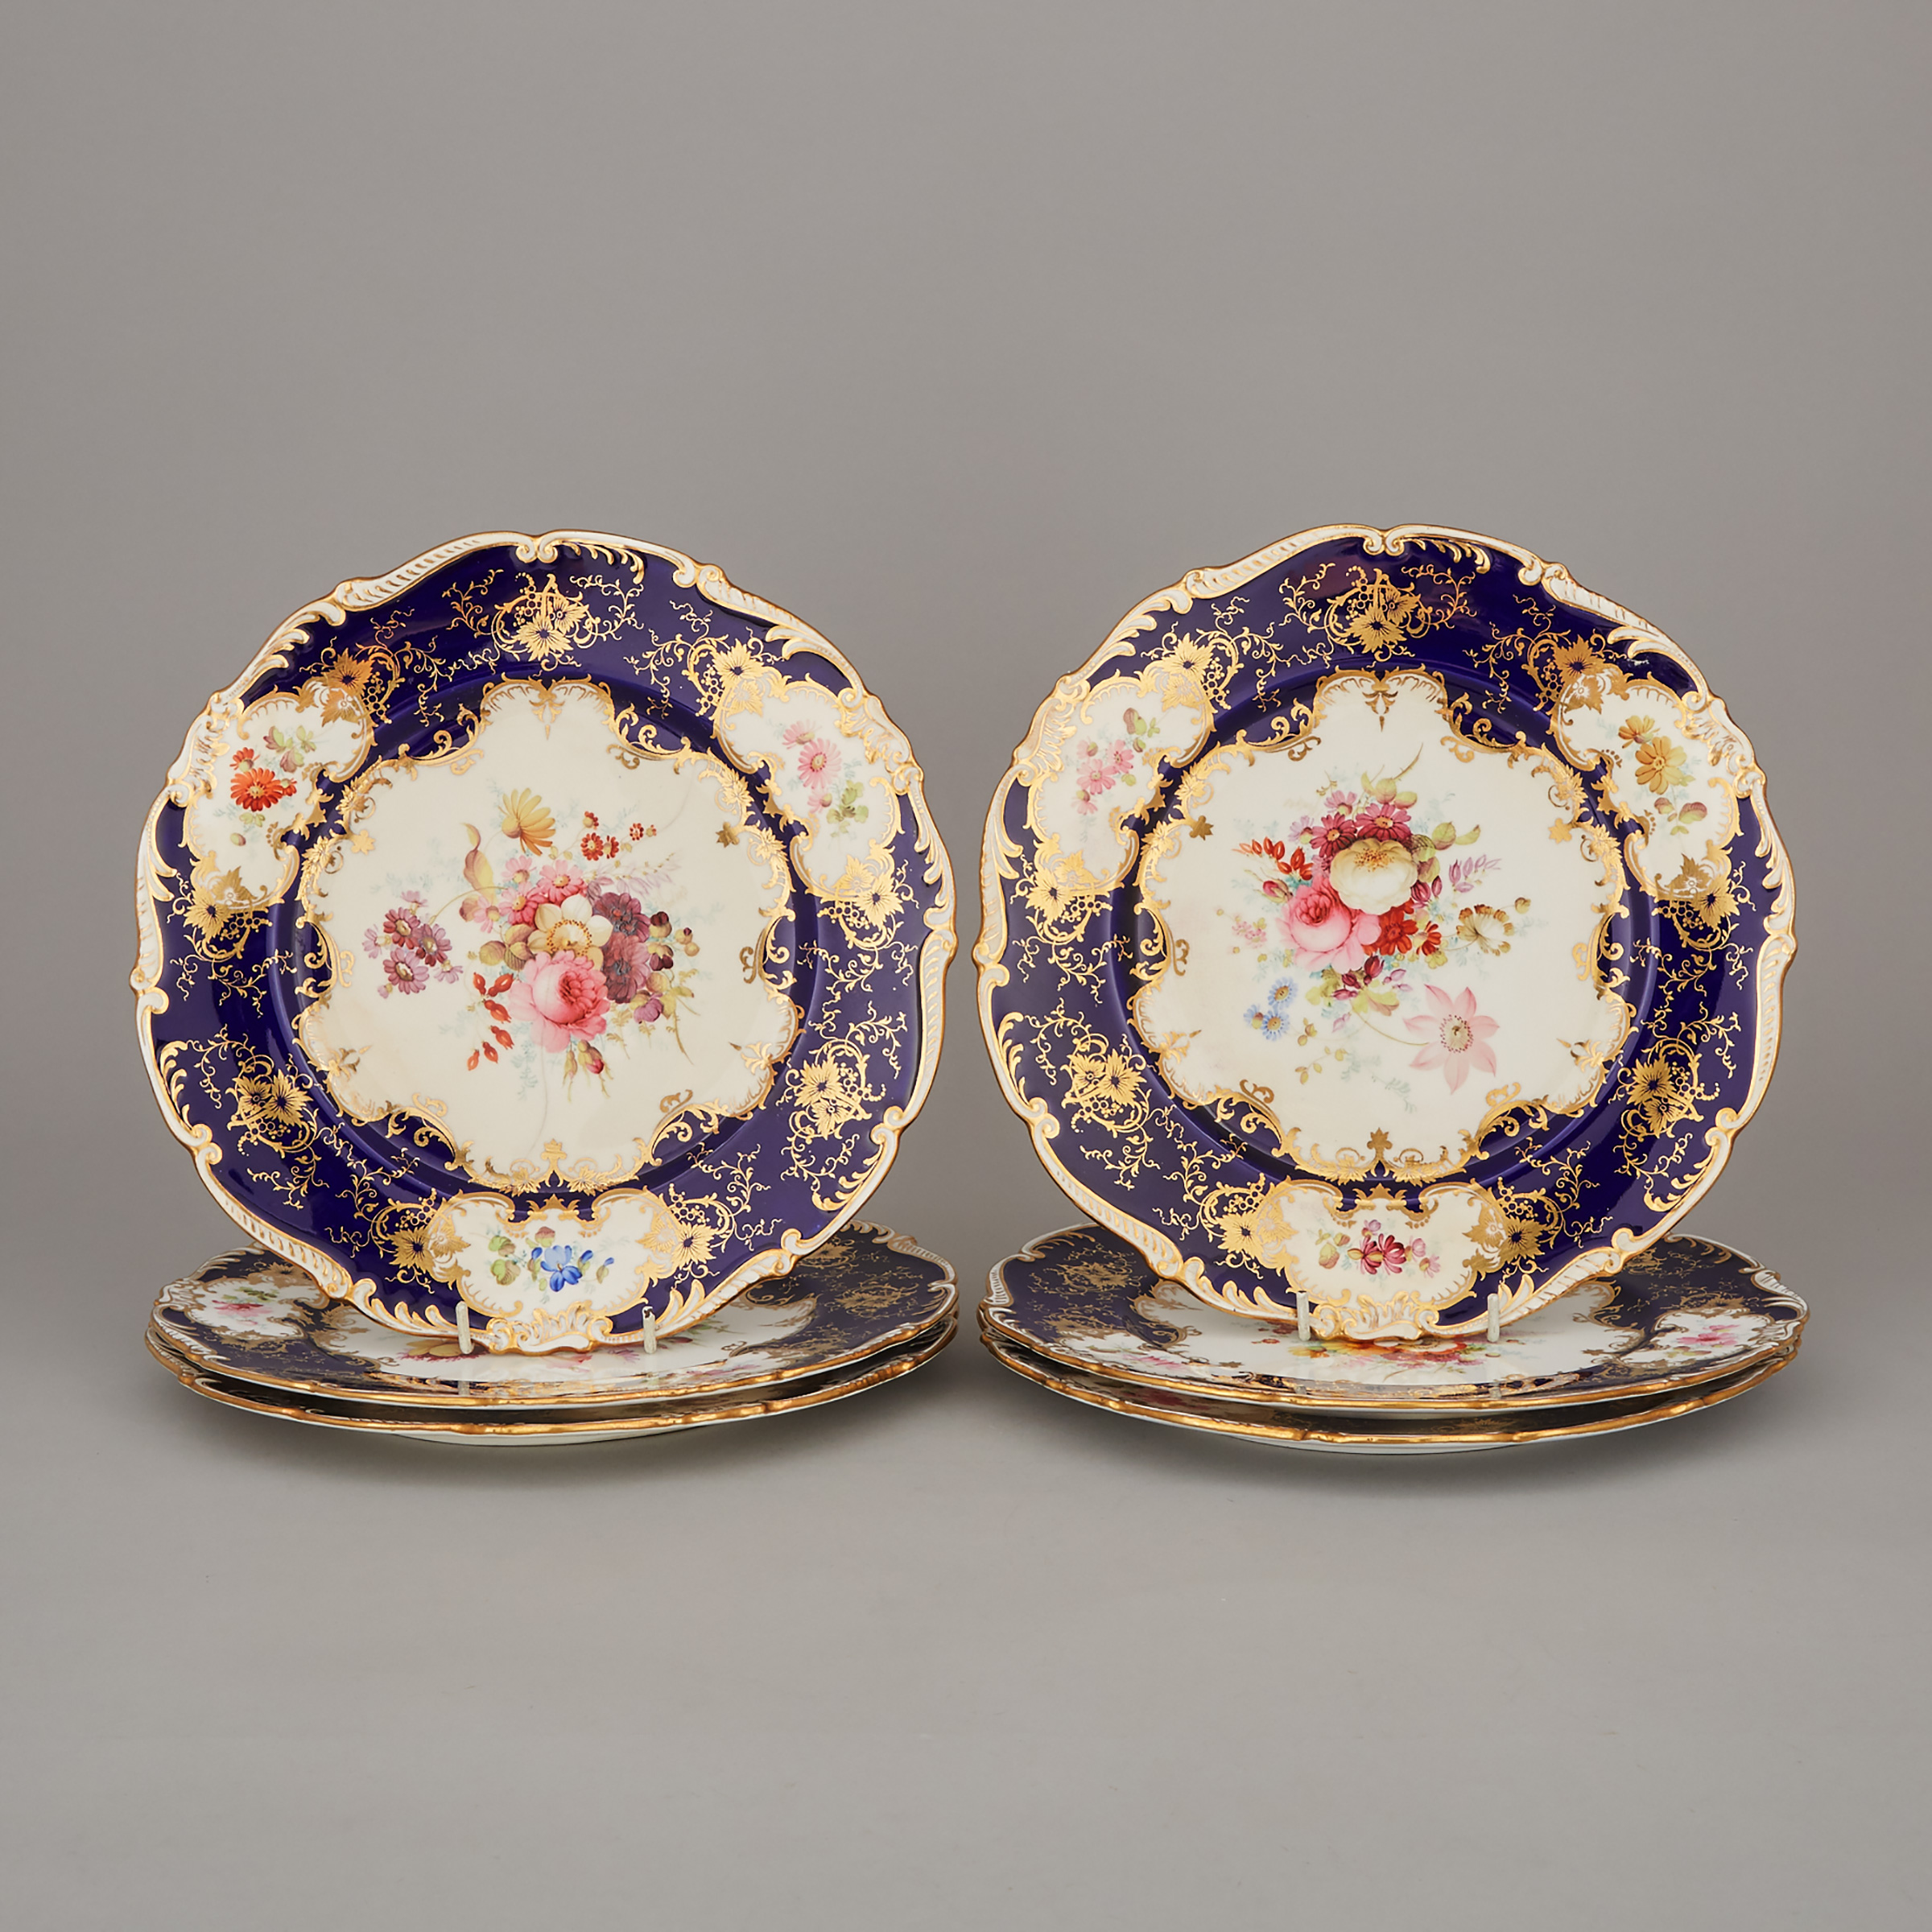 Six Coalport Floral Paneled Blue and Gilt Service Plates, Fred Howard, early 20th century